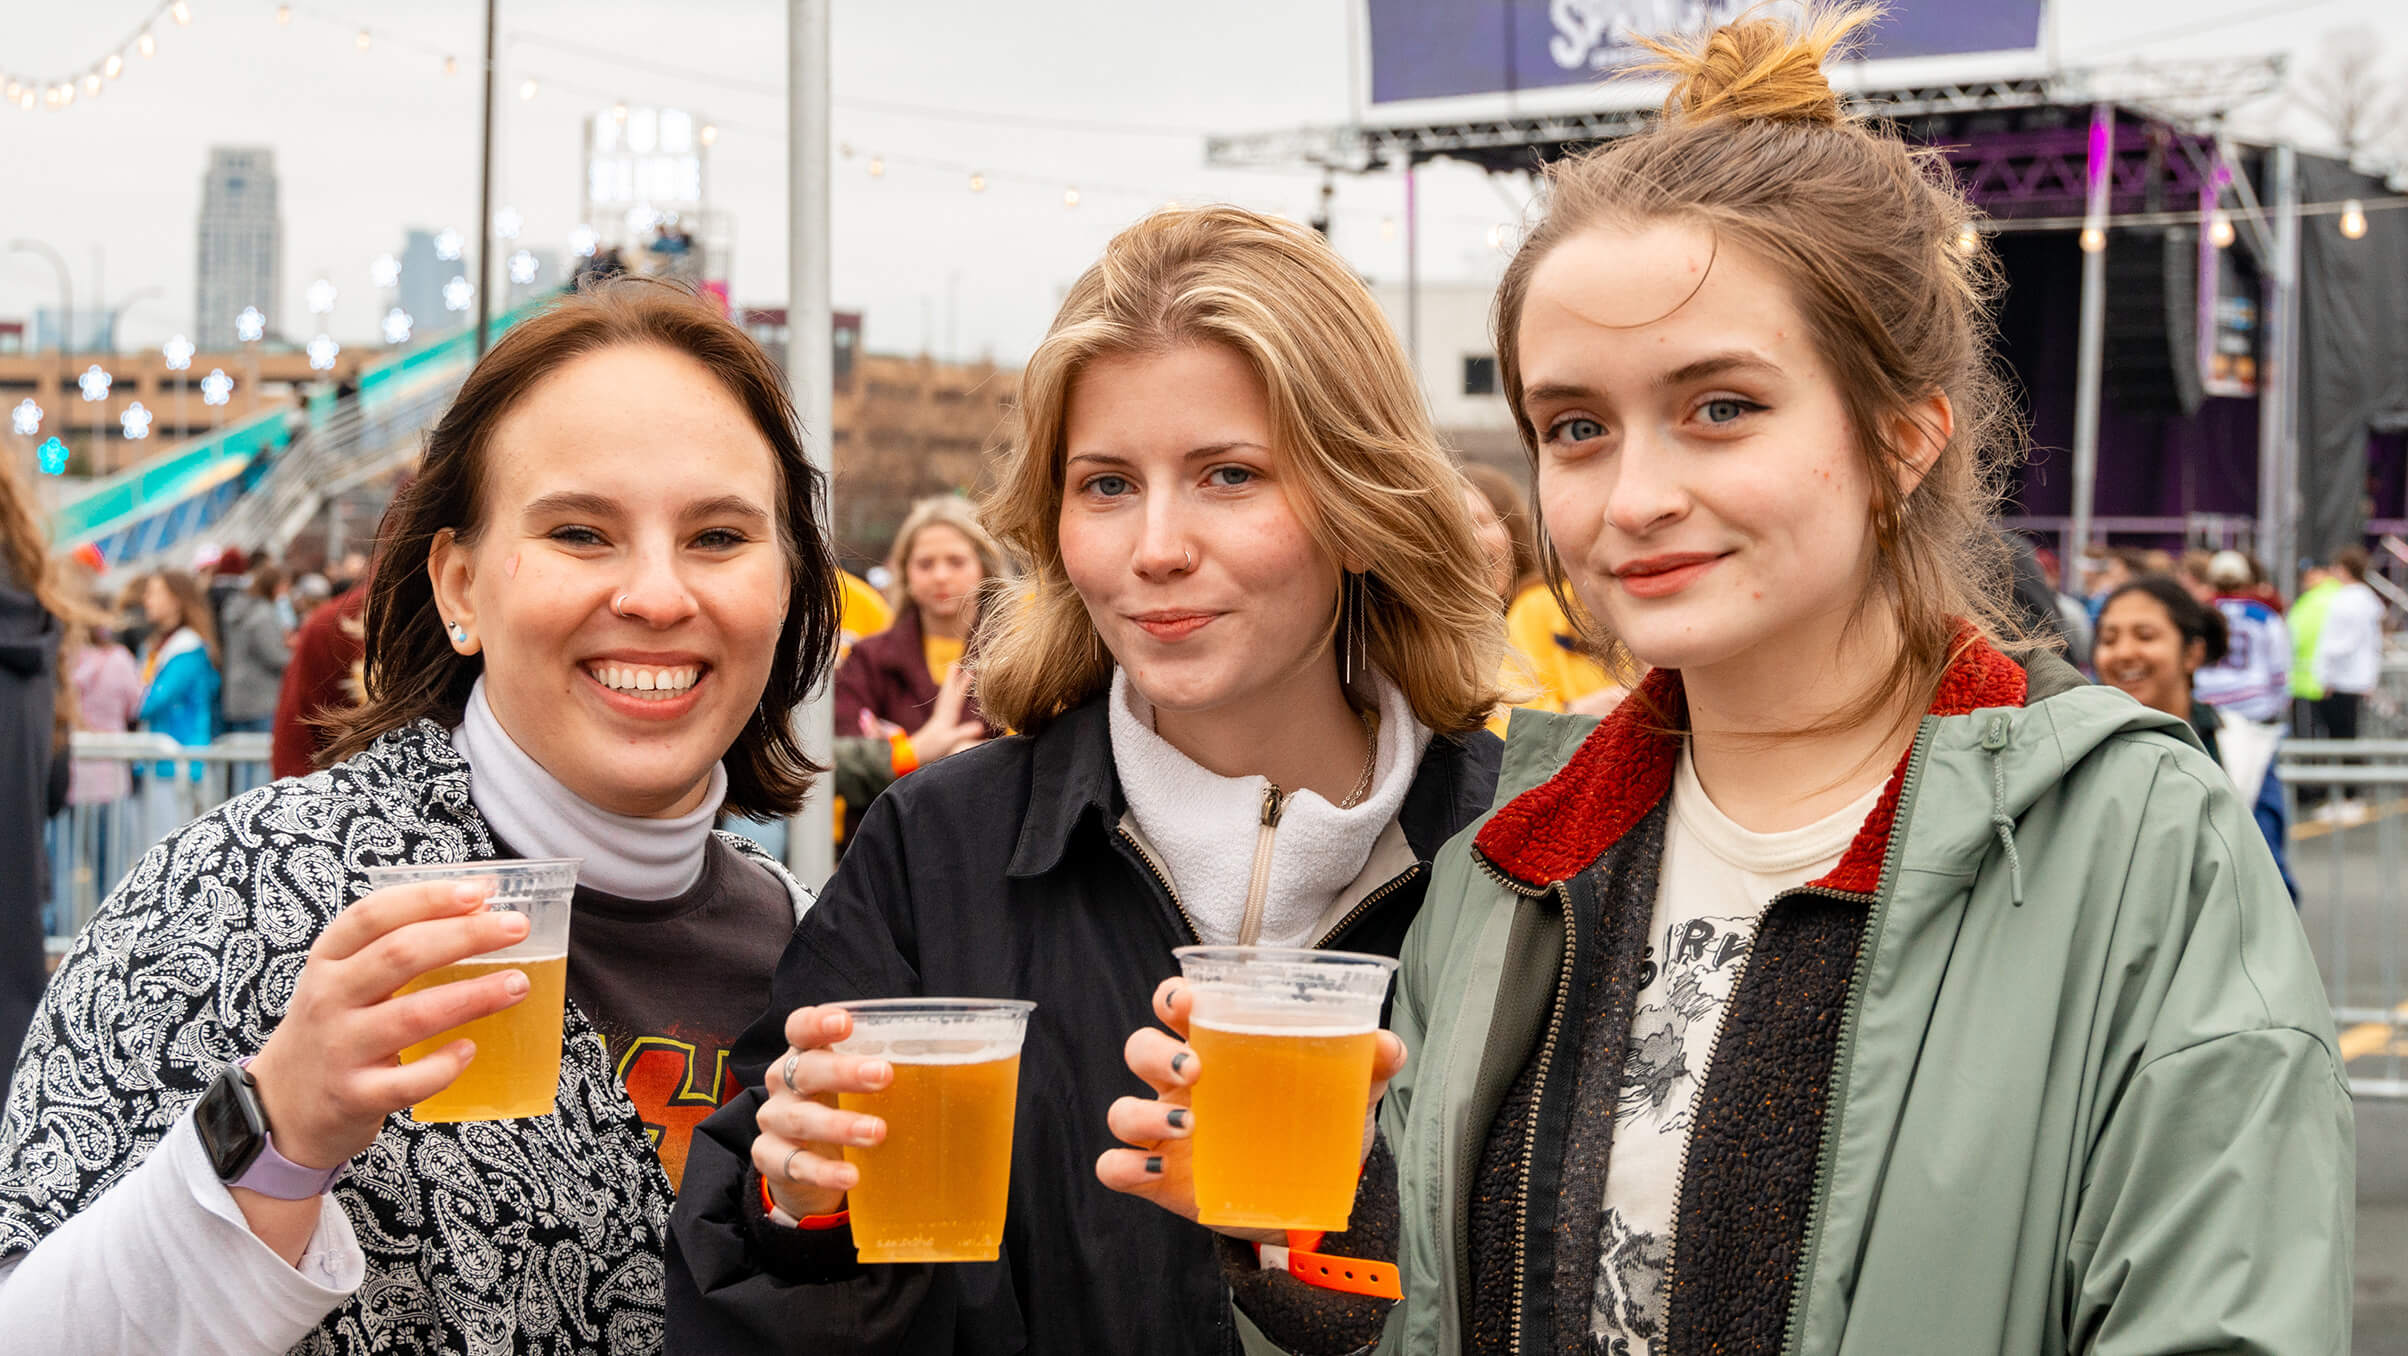 A photo of attendees in the beer garden